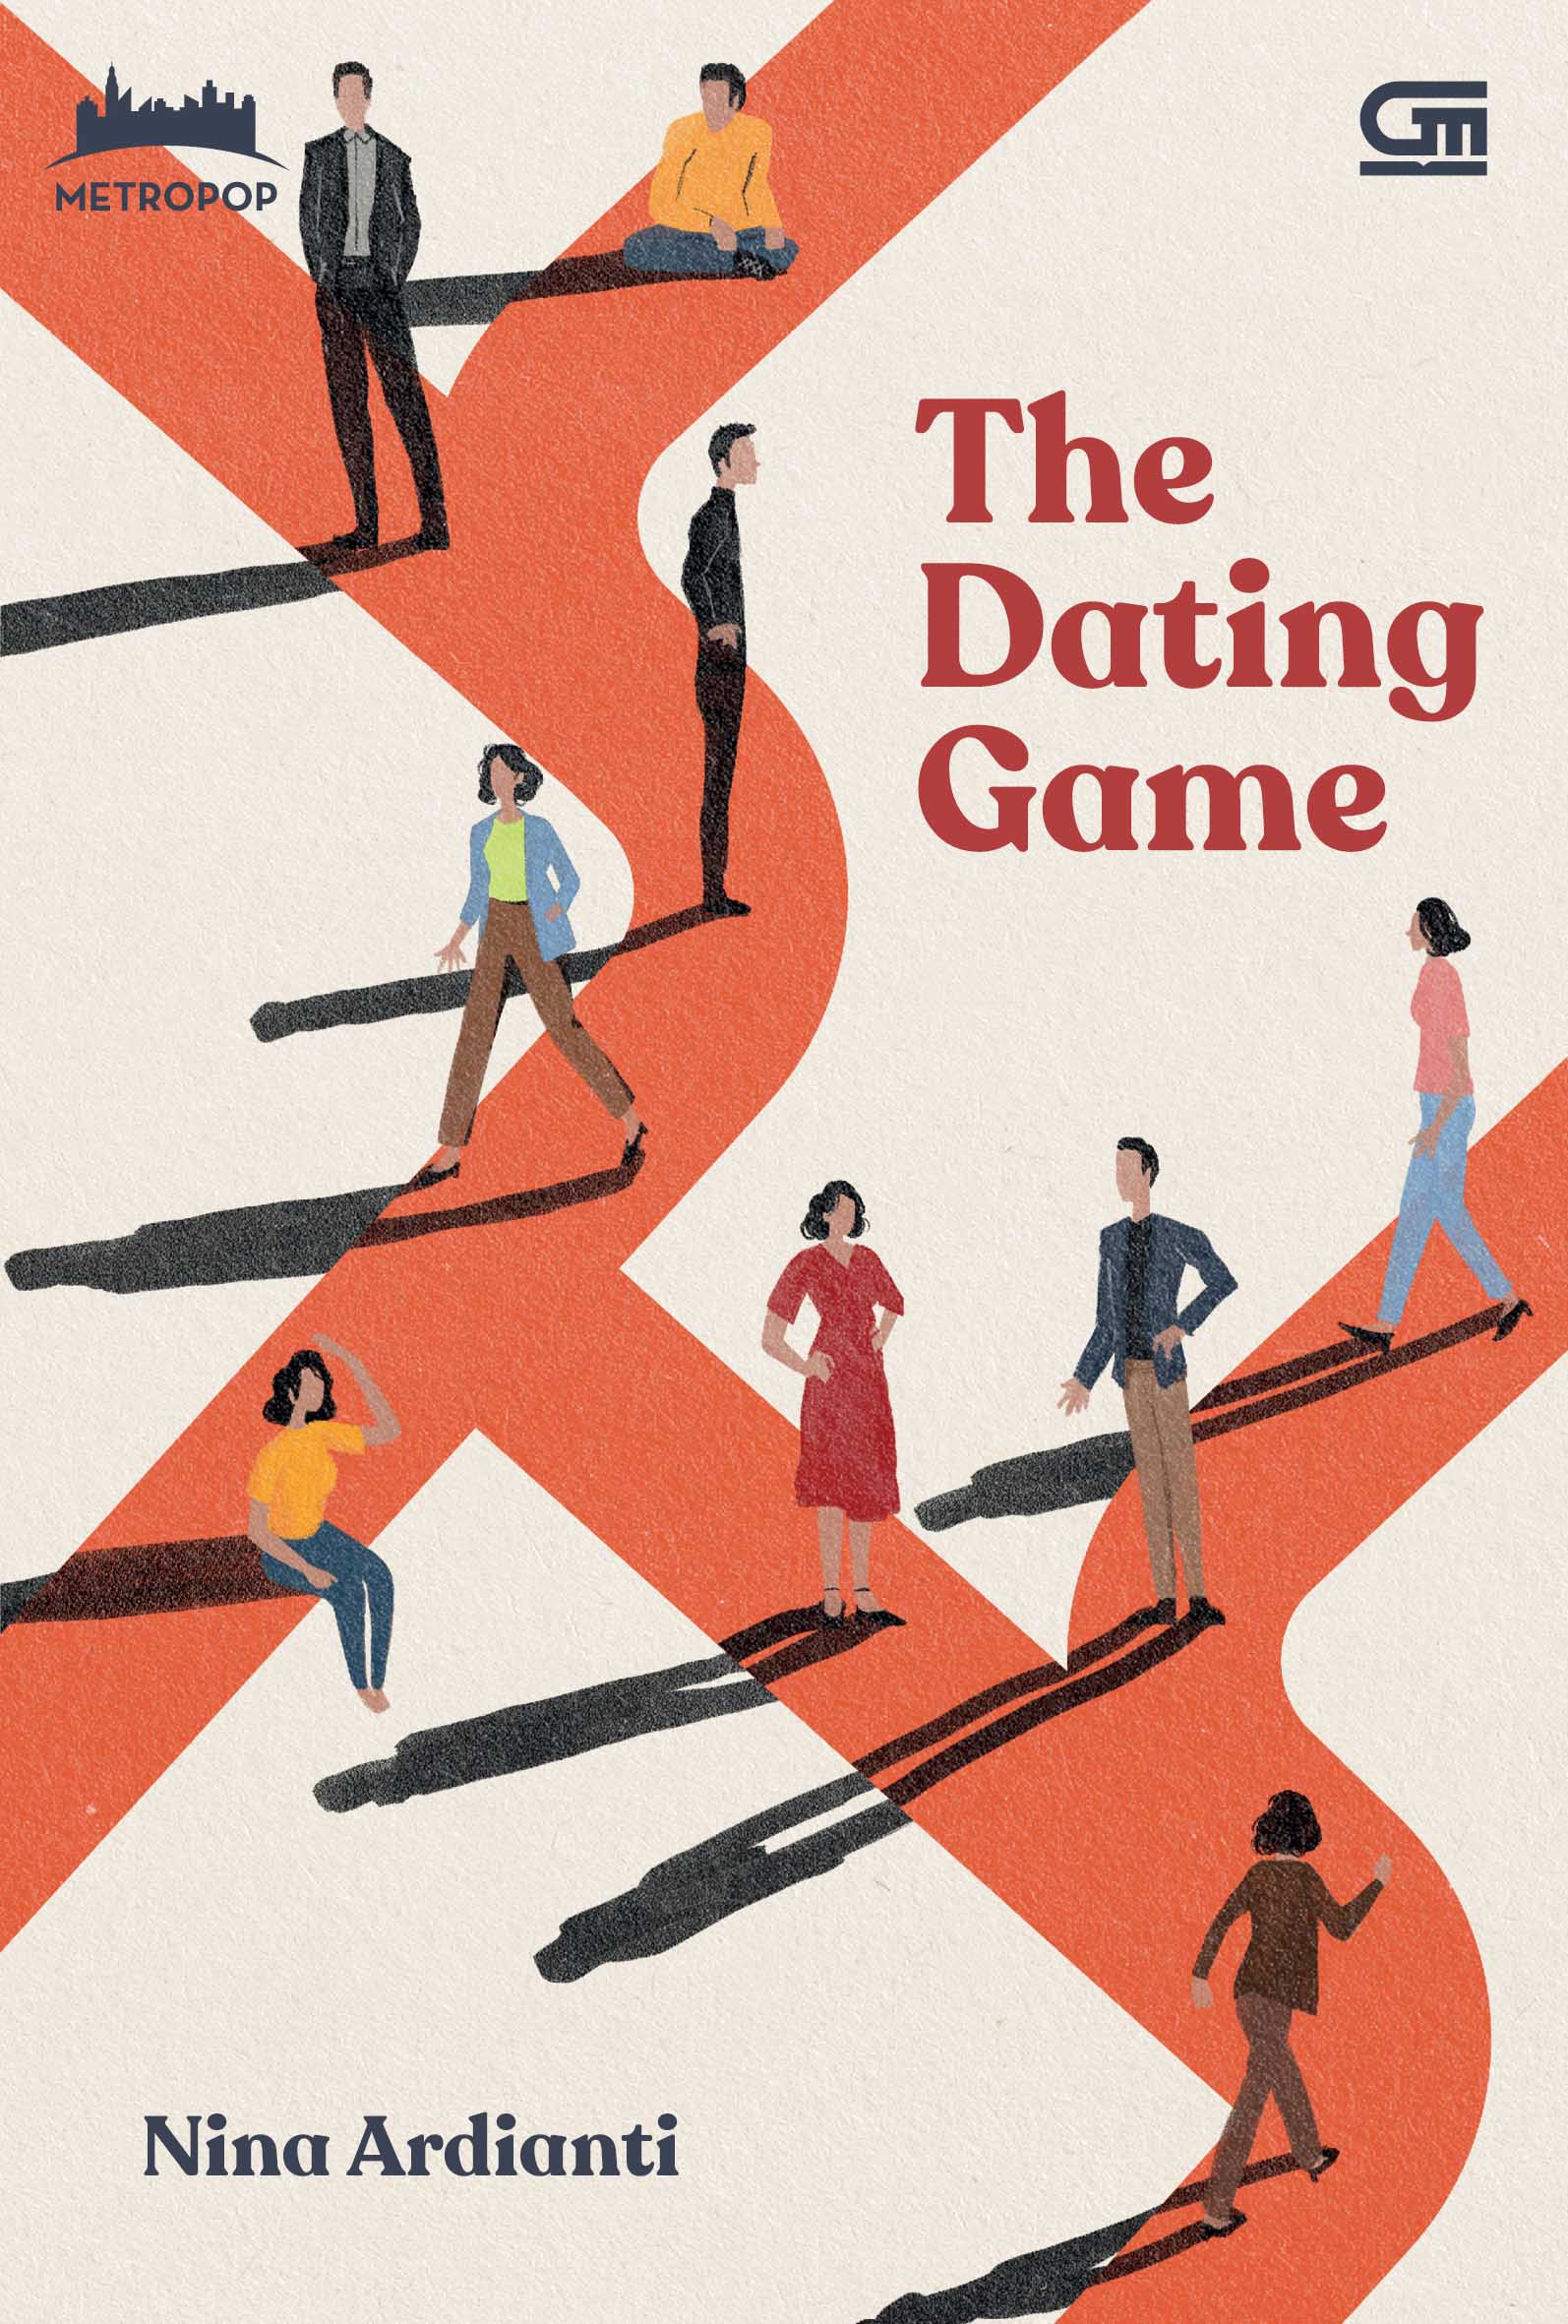 MetroPop: The Dating Game